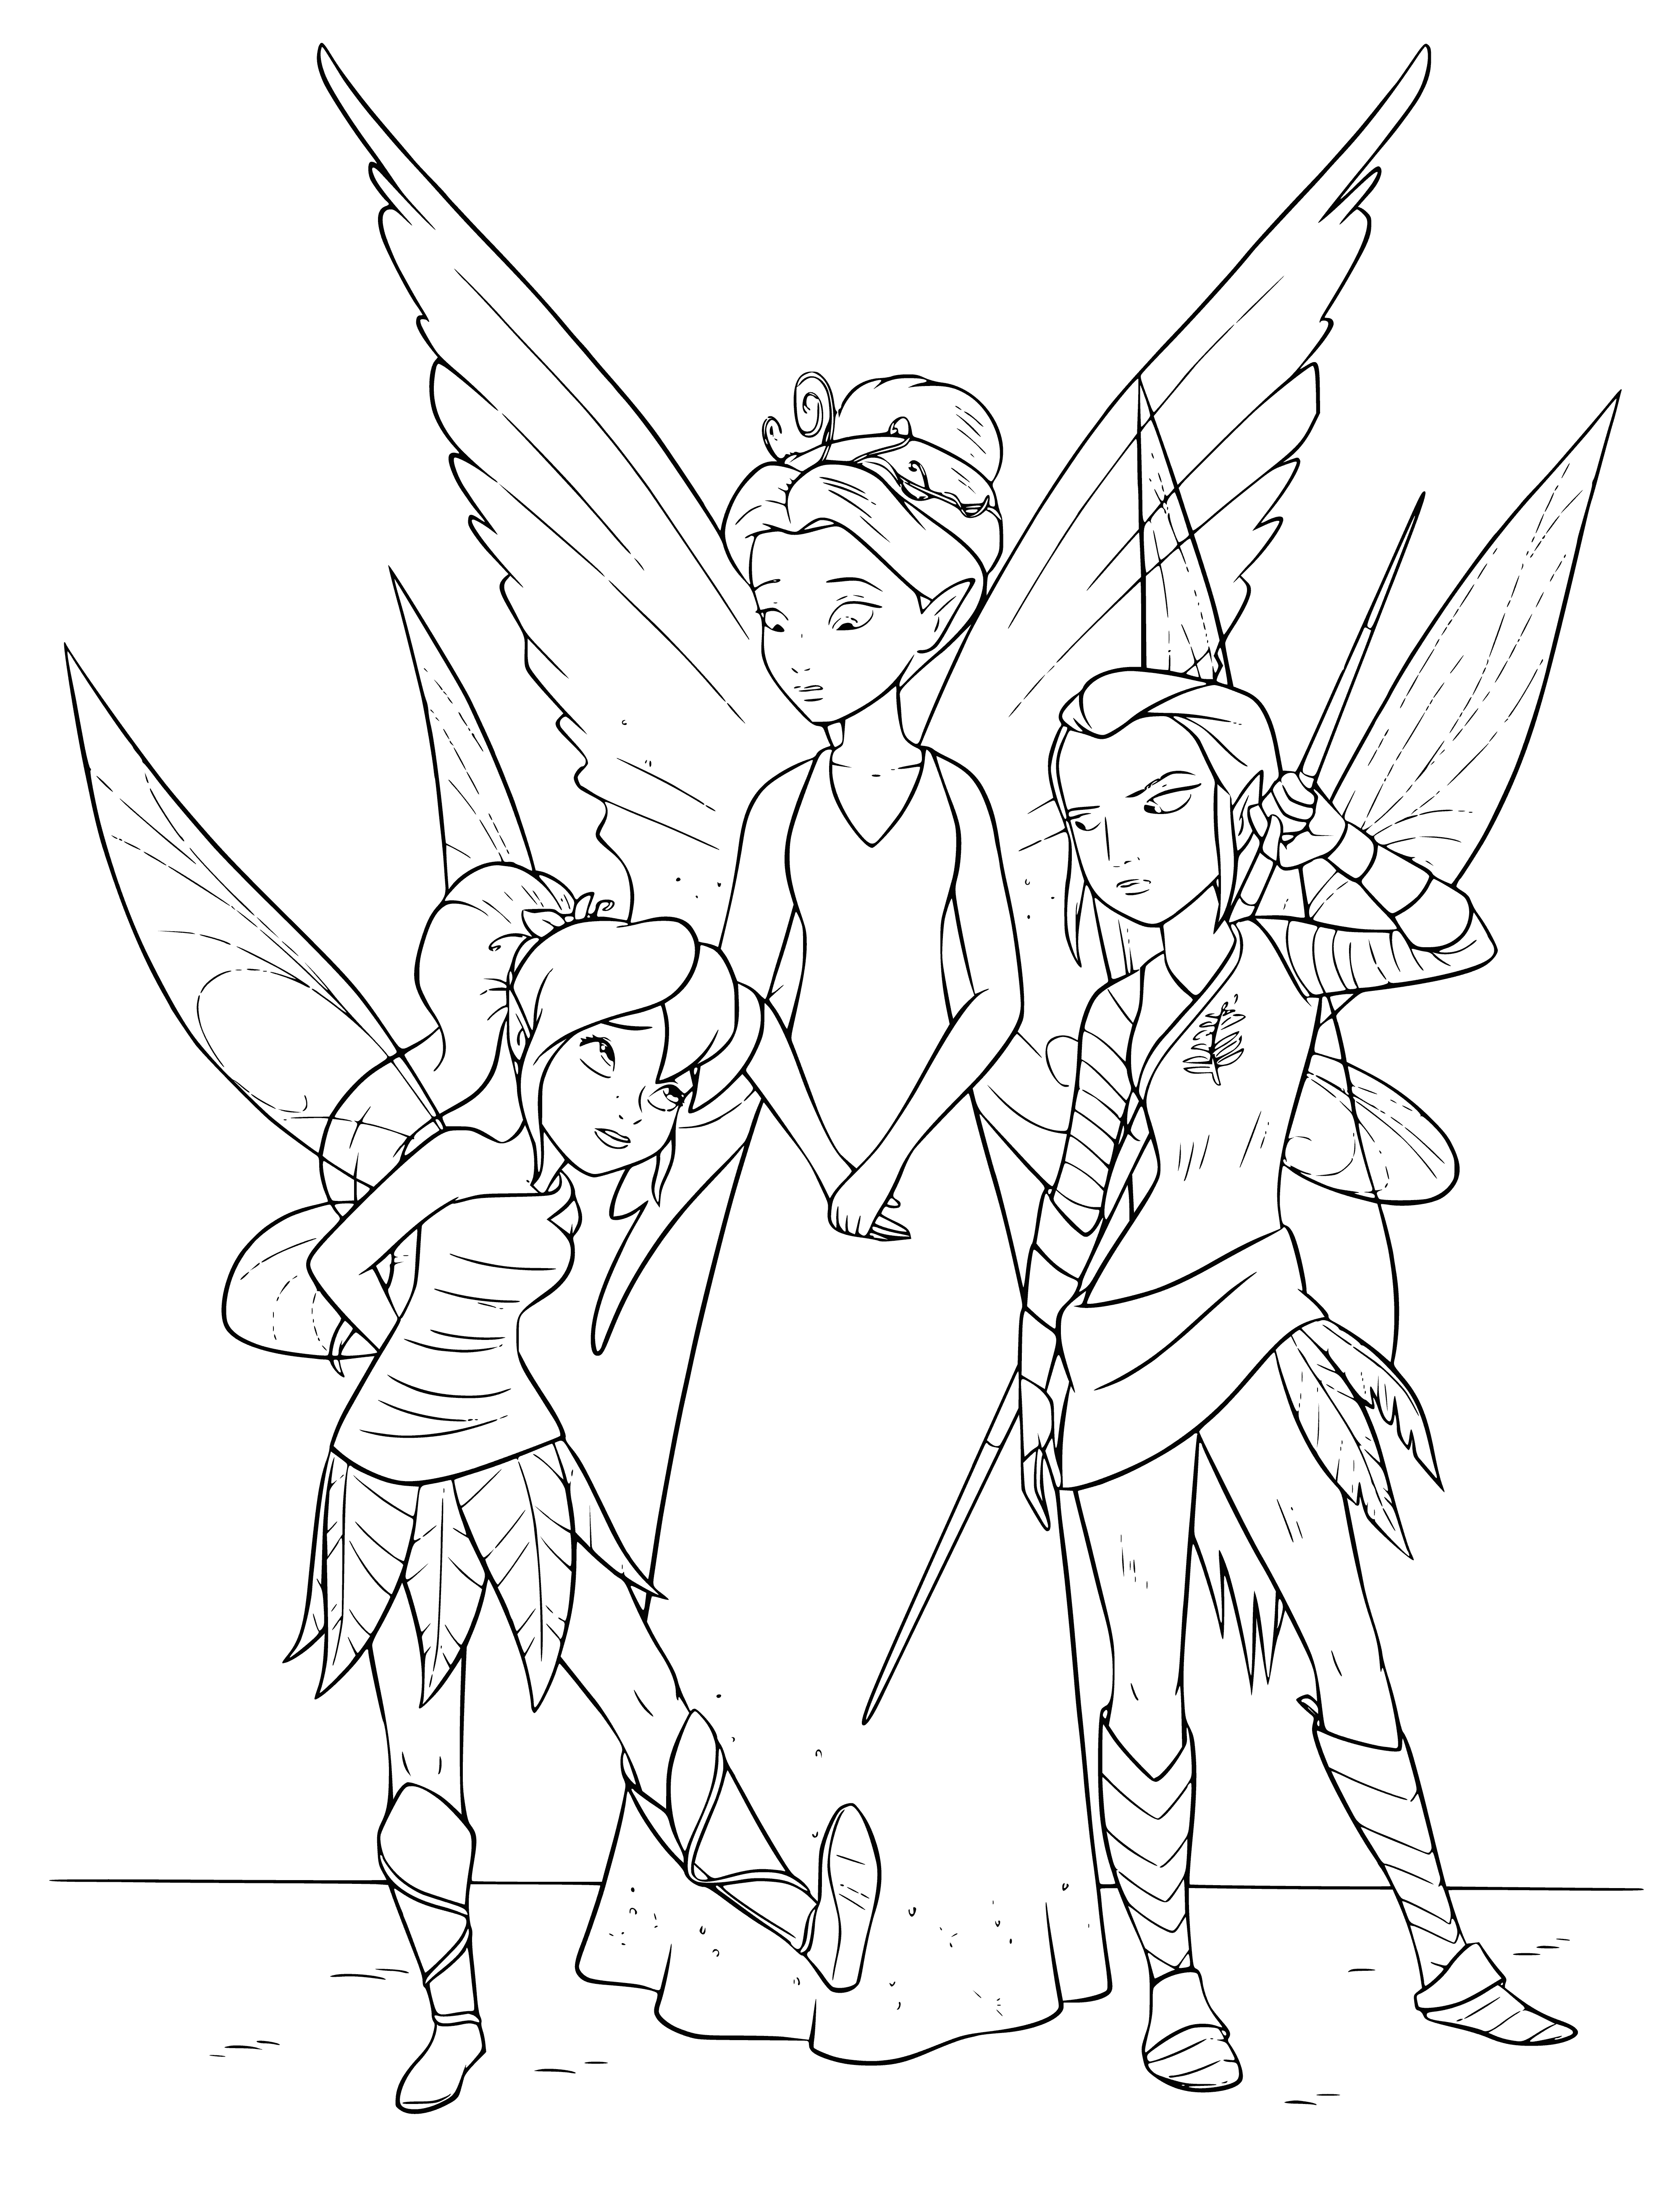 coloring page: Mysterious purple creature surrounded by smaller winged creatures with horns/antlers, all staring at it. #fantasycreatures